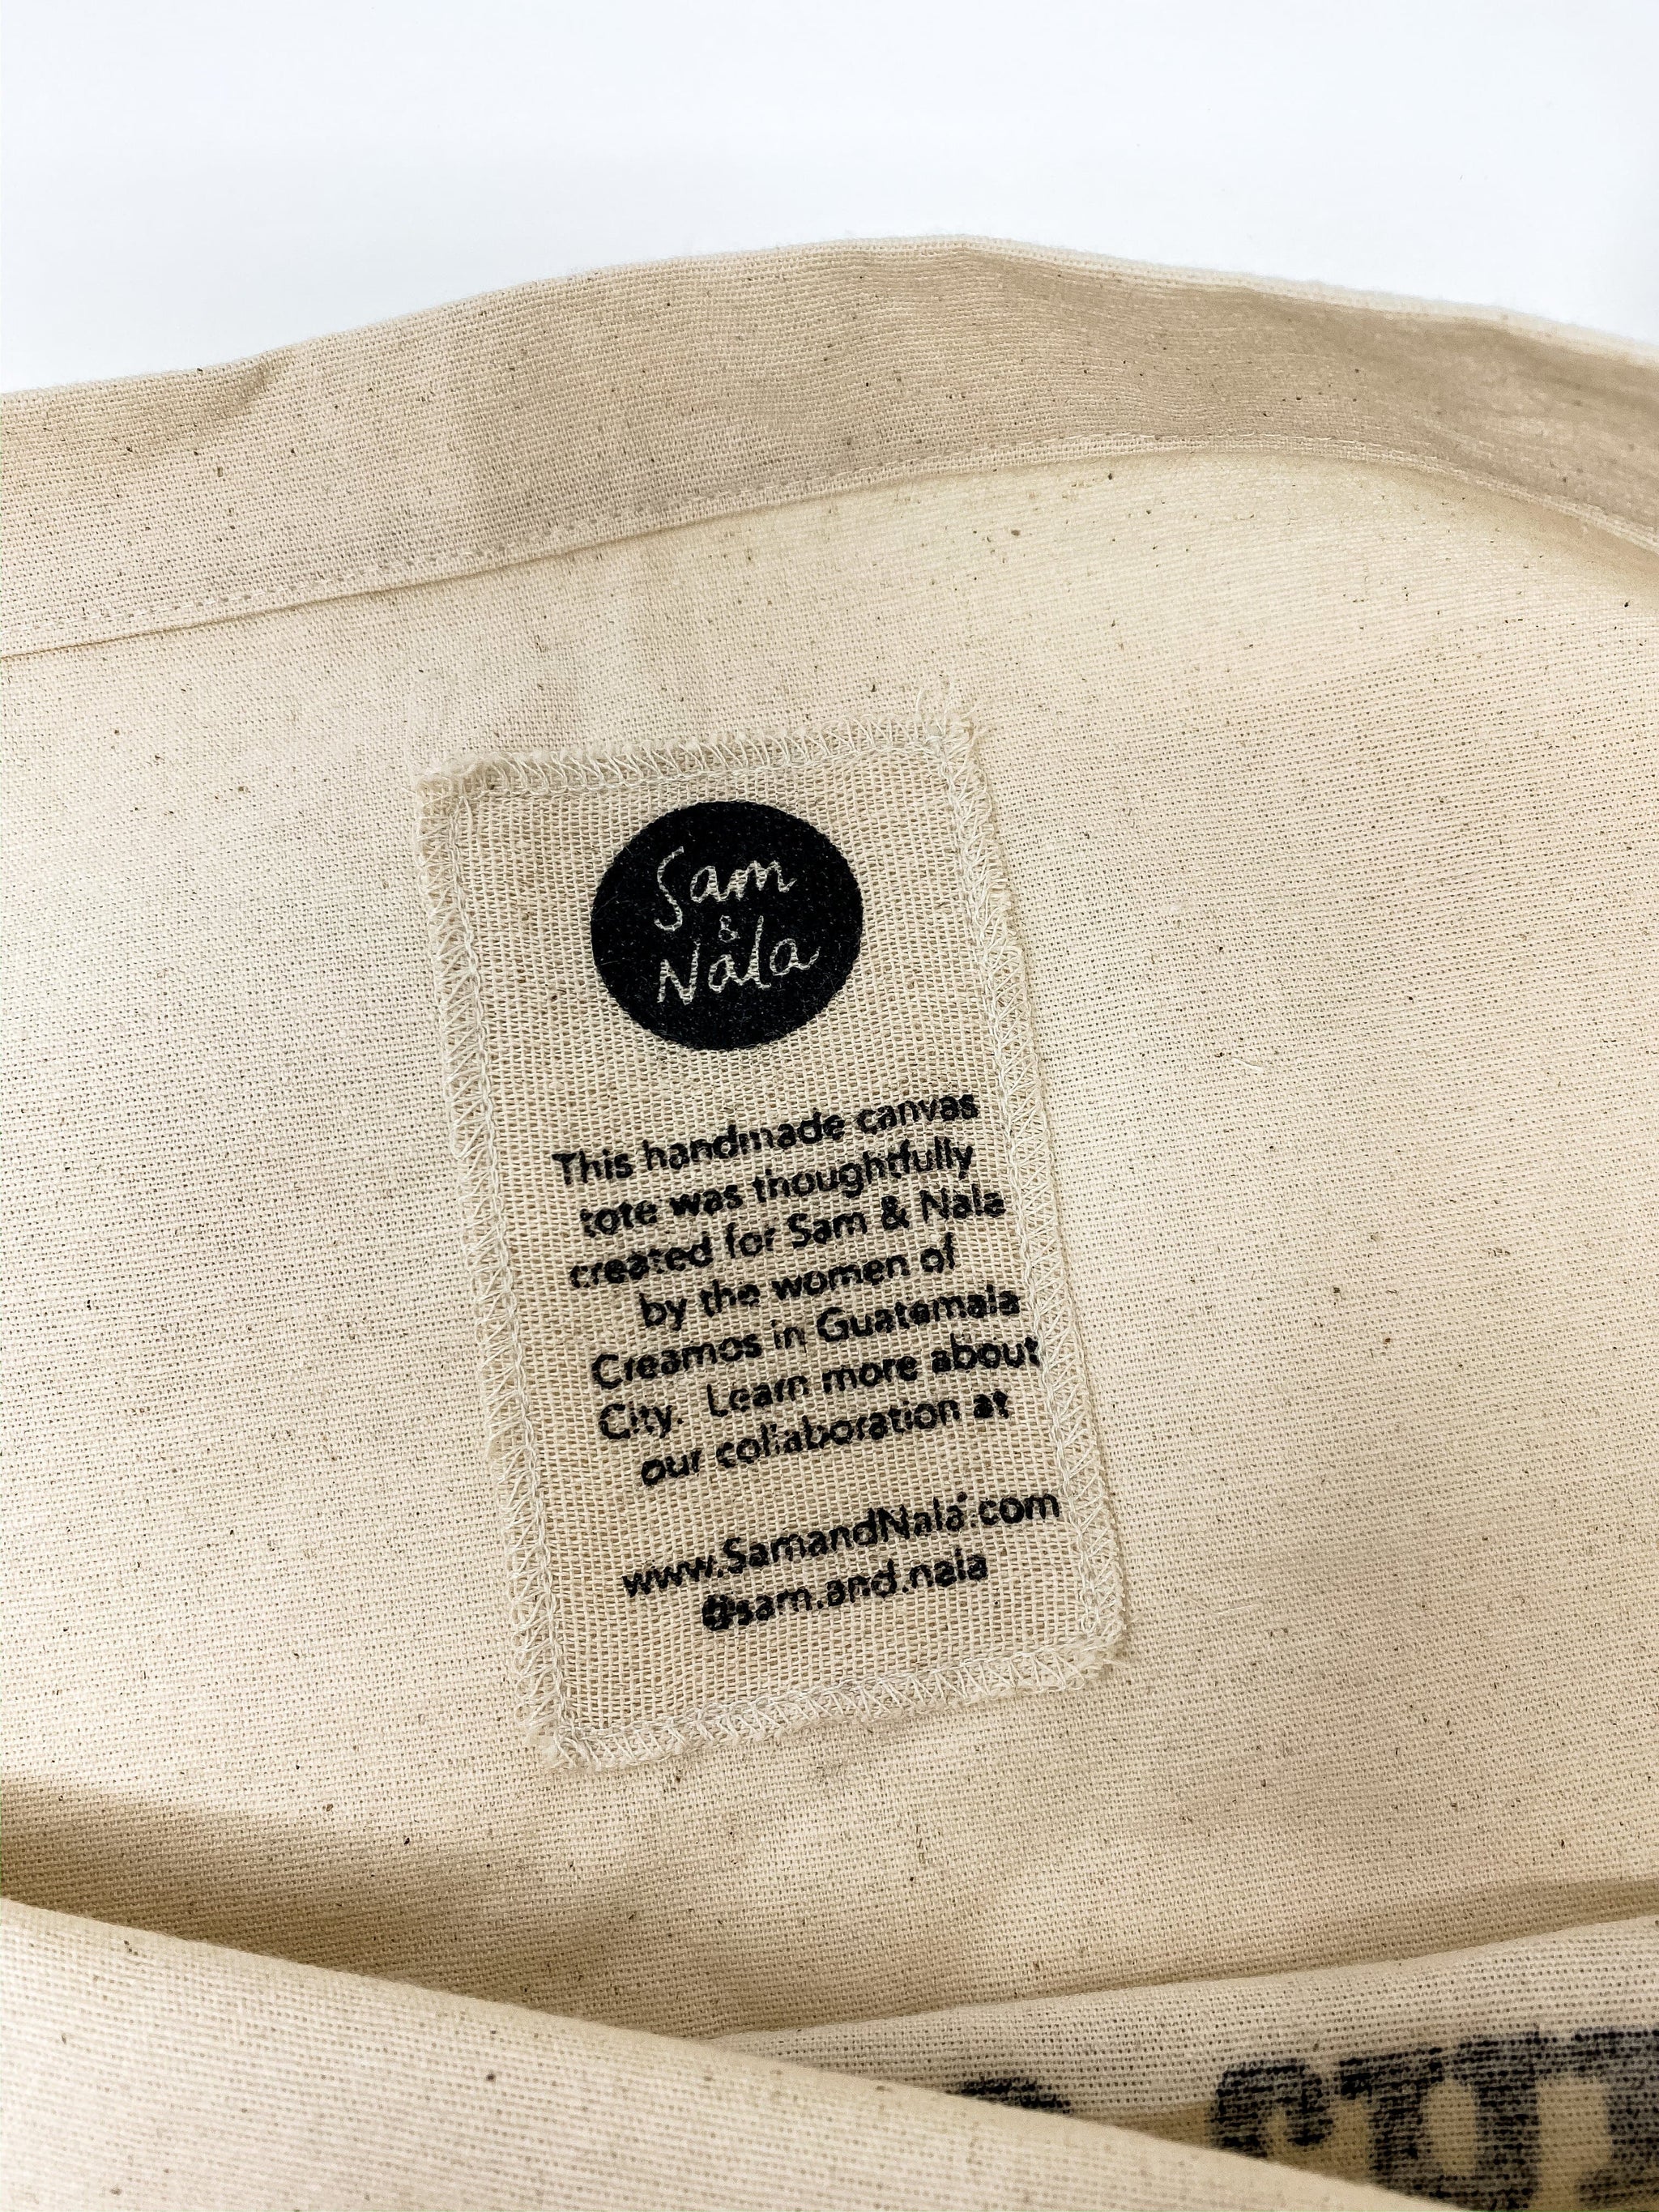 Recycled Canvas Bags - Make Good Choices. Love, Mom